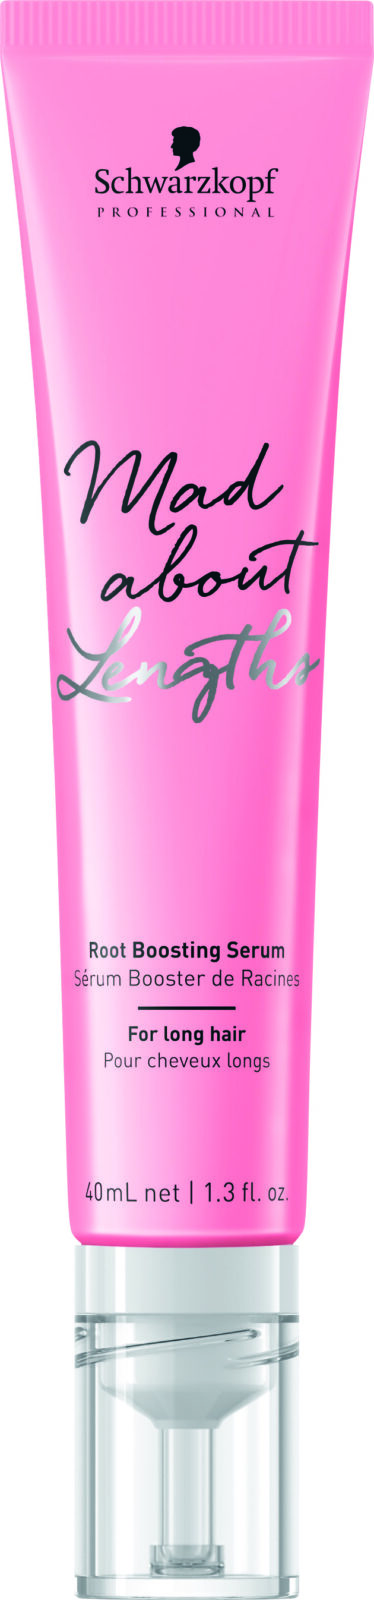 Mad About_Root Boosting Serum